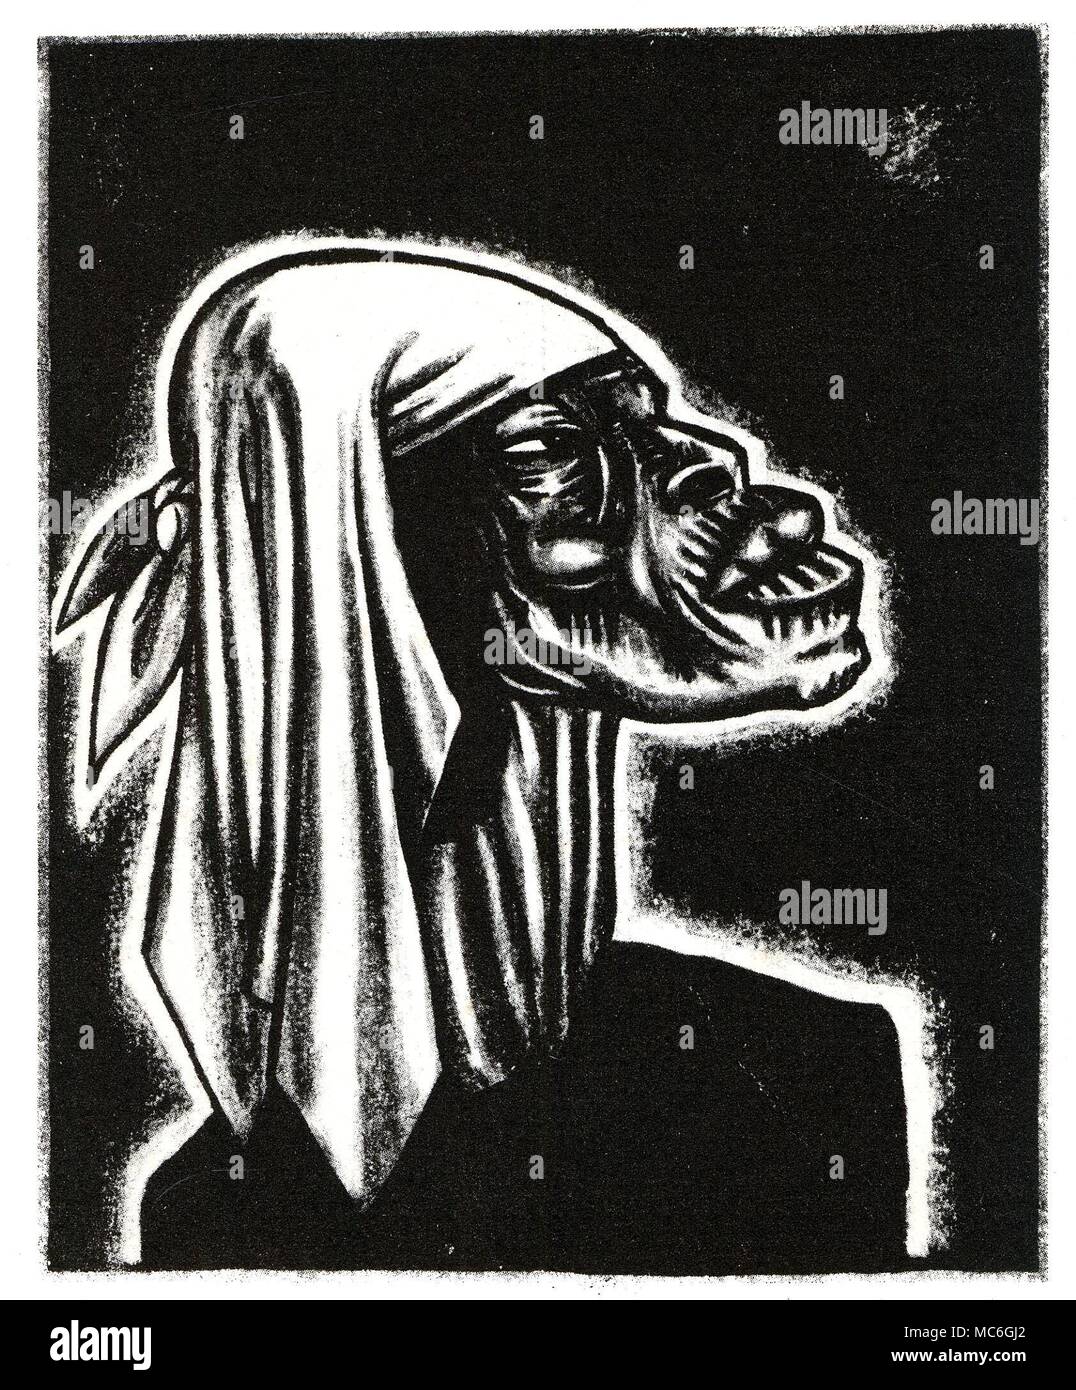 VOODOO - MAMALOI The Mamaloi, Maman CÃšlie, 'old priestess of dark mysteries', whose skill as a Voodoo magician was witnessed by Seabrook on a number of occasions. Illustration by A. King, for W.B. Seabrook, The Magic Island, 1929. Stock Photo